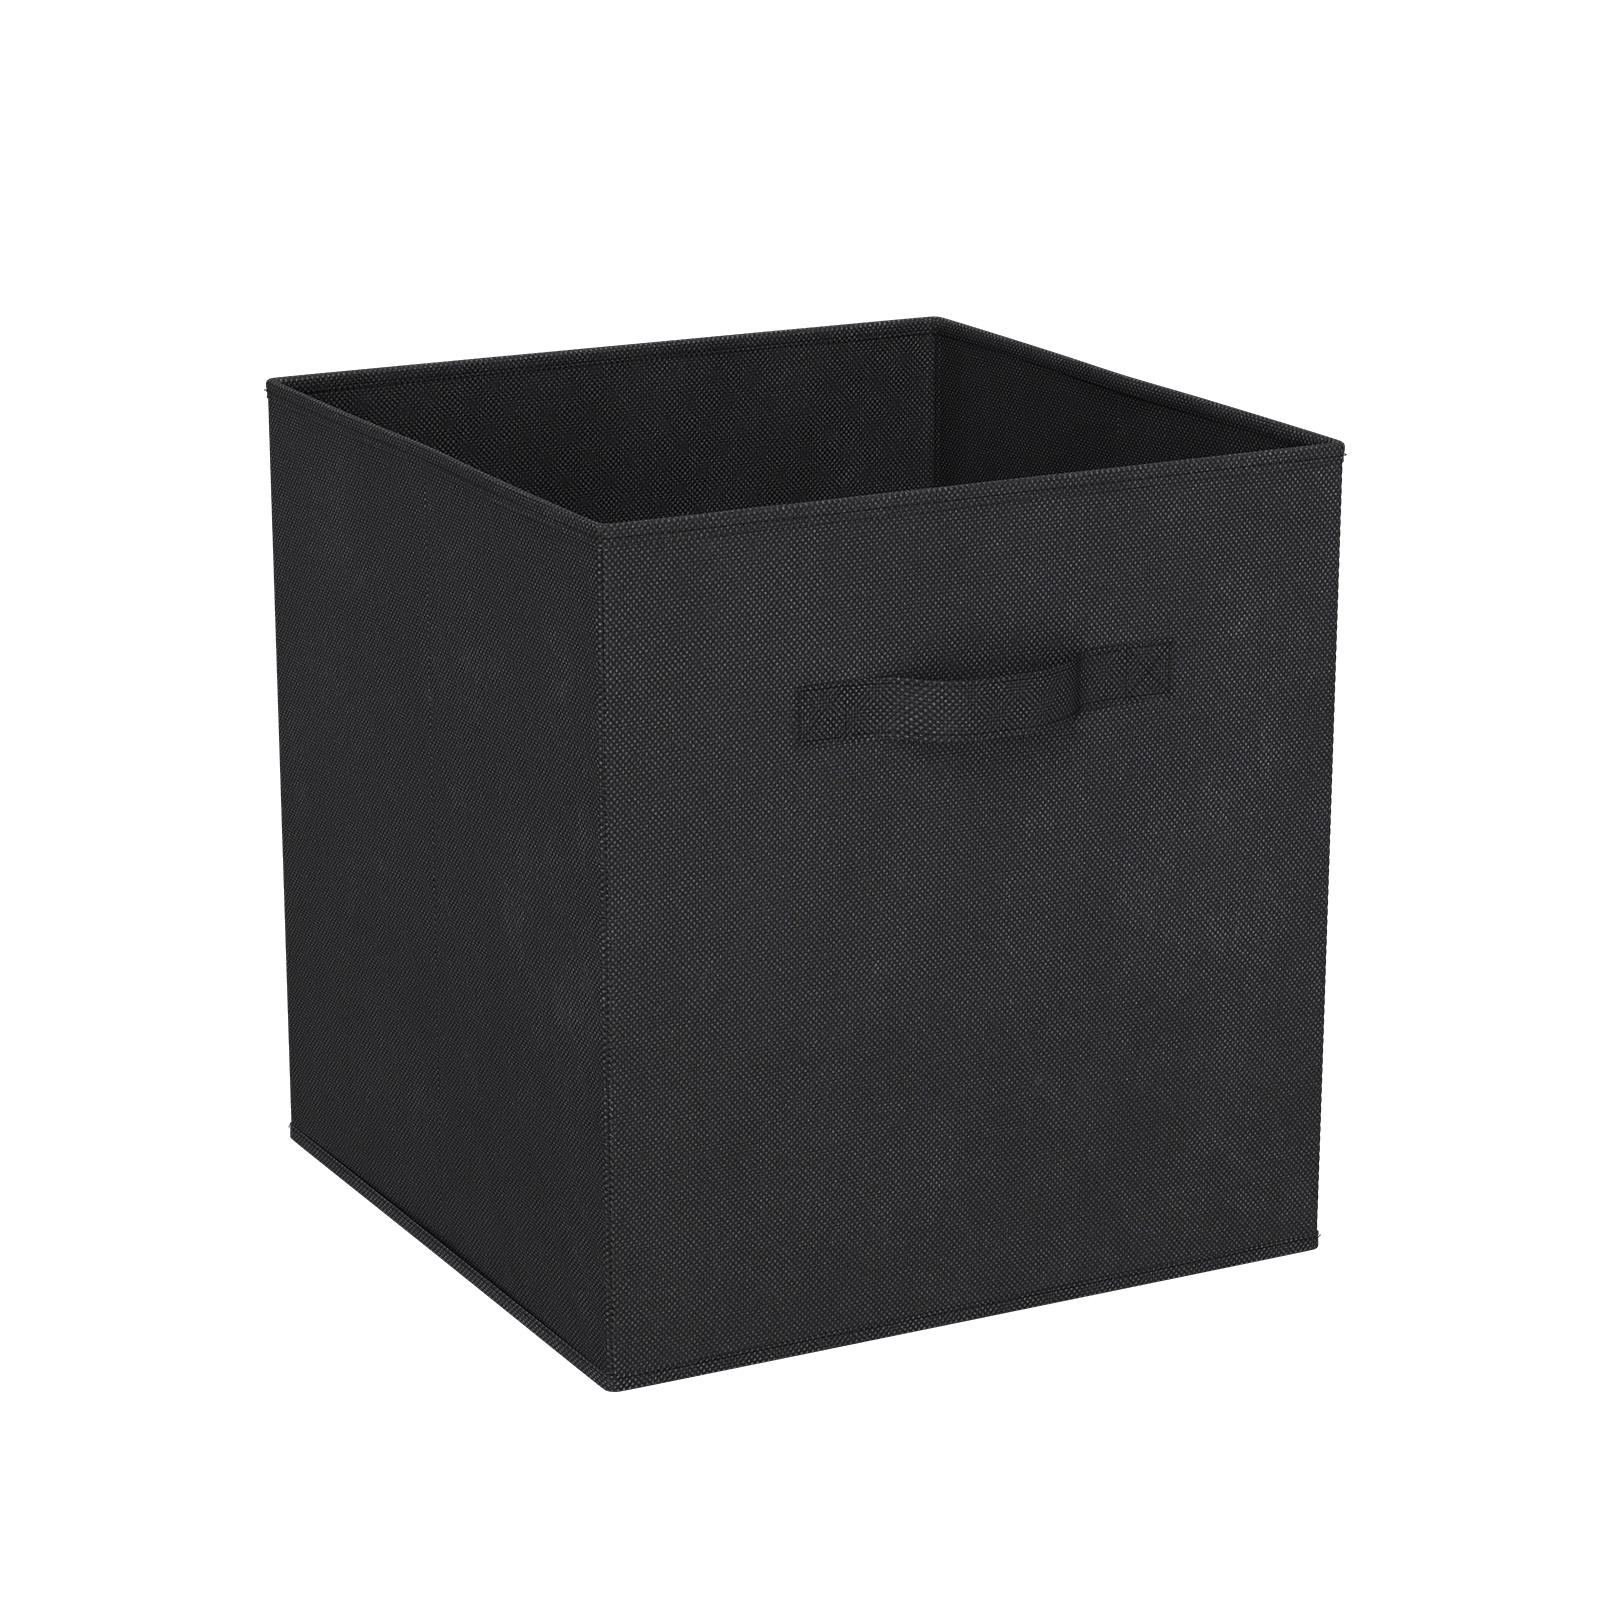 Clever Cube Compact Fabric Insert Black